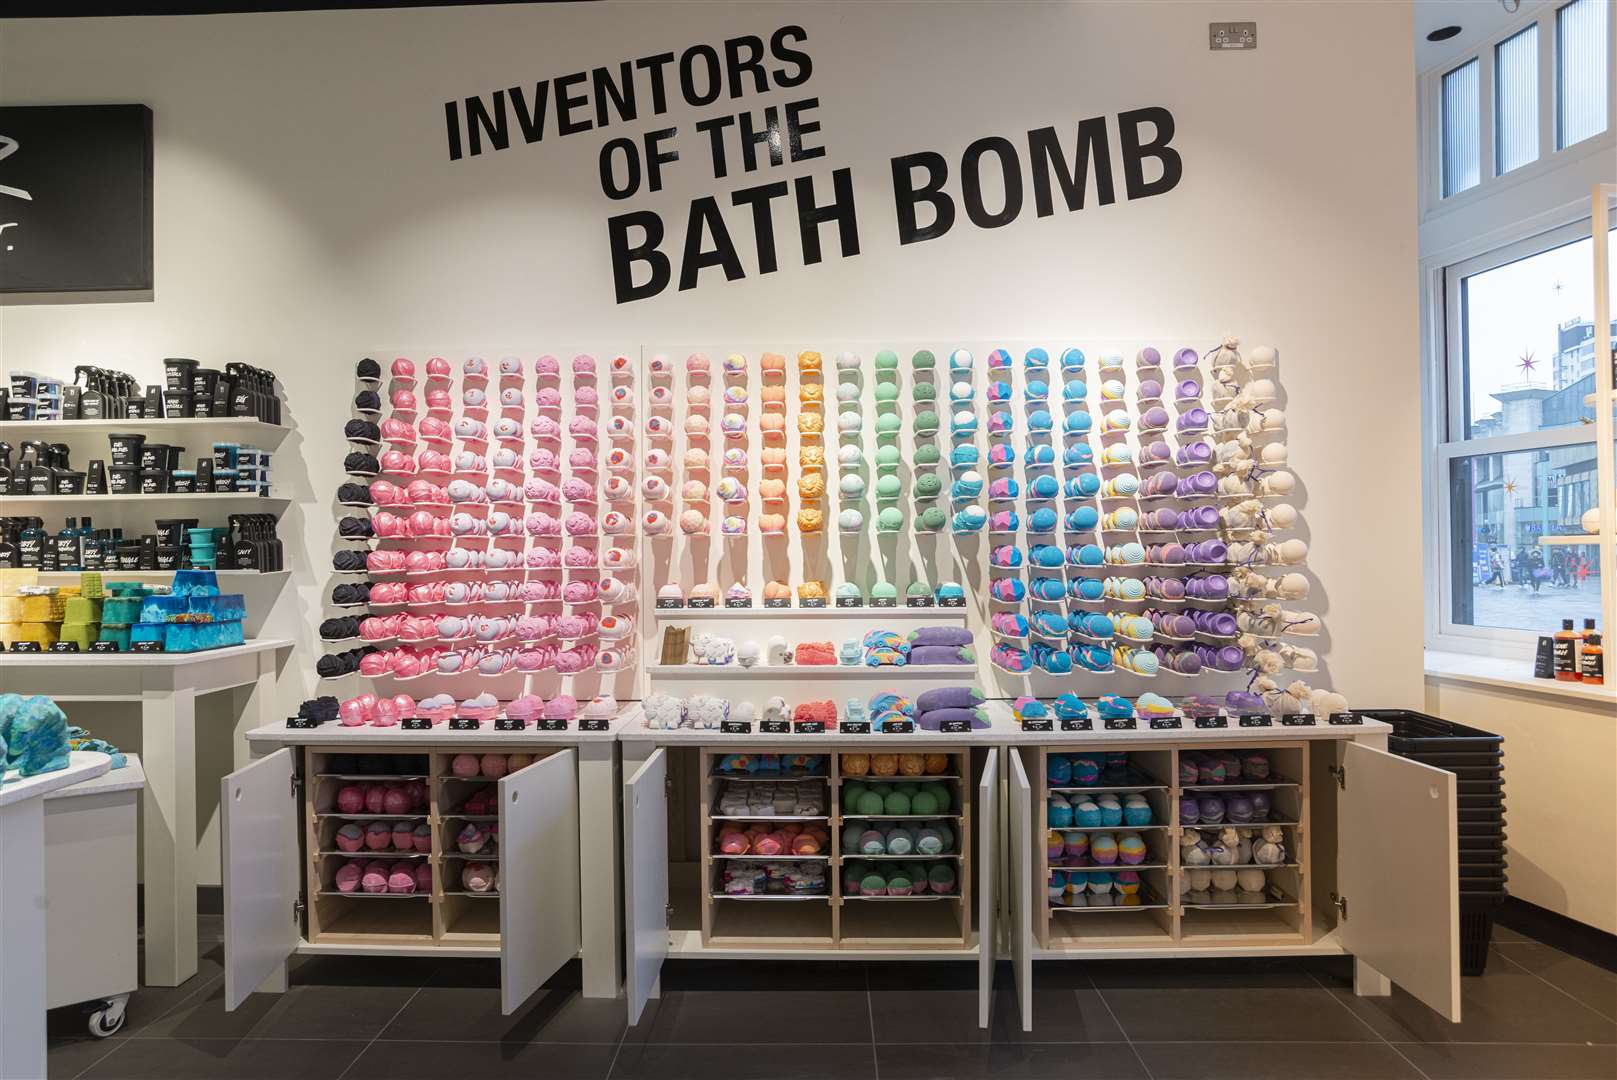 Lush will open the doors on its expanded shop in Bluewater today